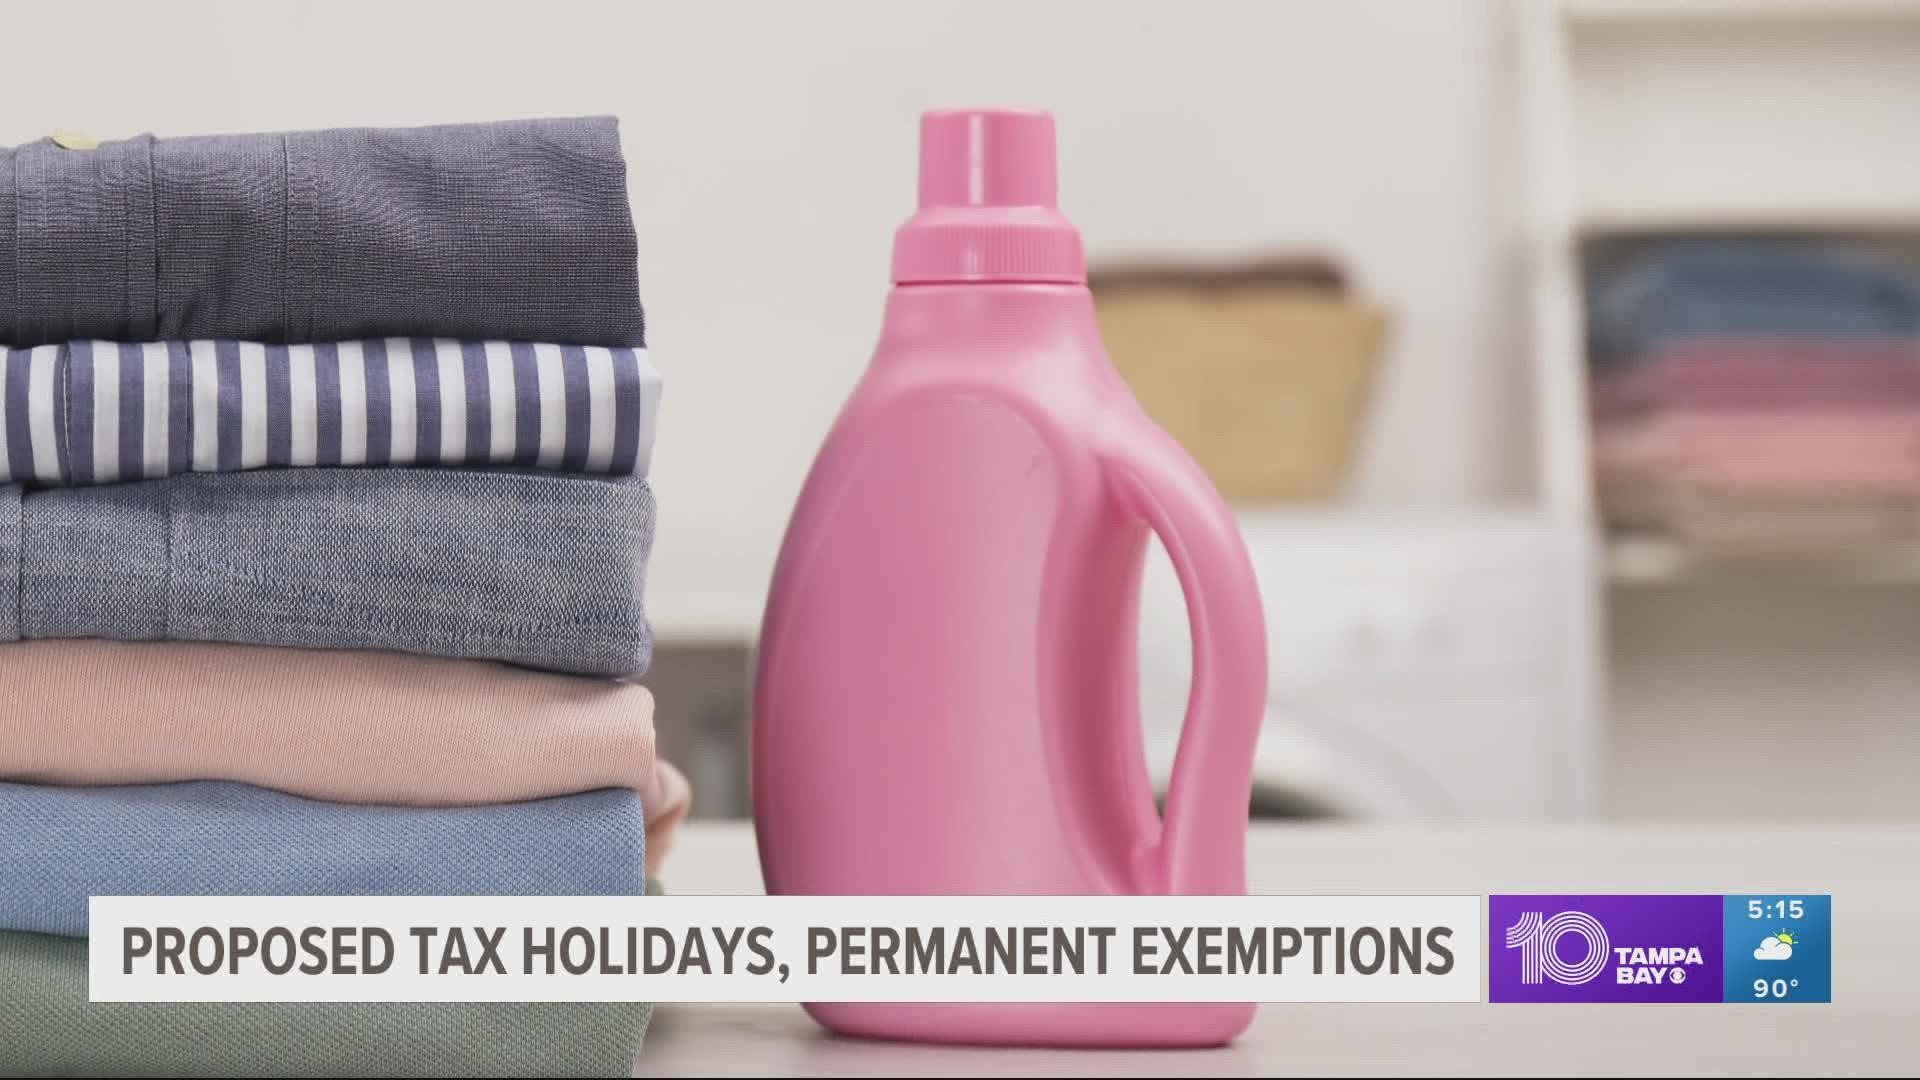 If passed, there will be a yearlong tax exemption on other household items families need every day.